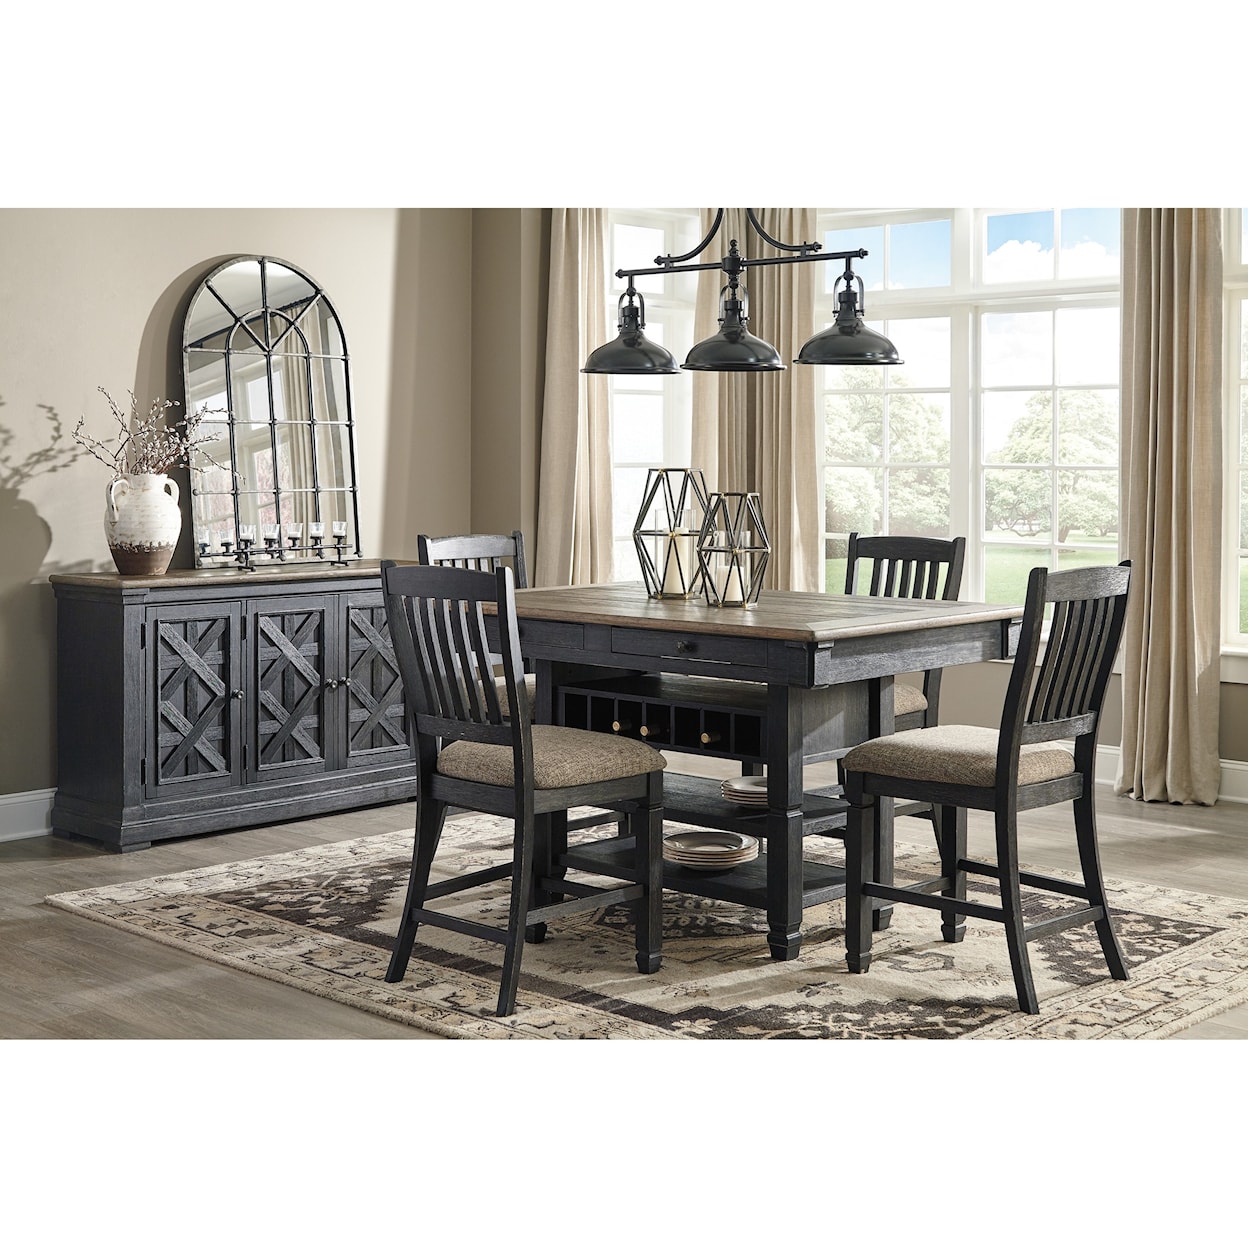 Signature Design by Ashley Tyler Creek Casual Dining Room Group